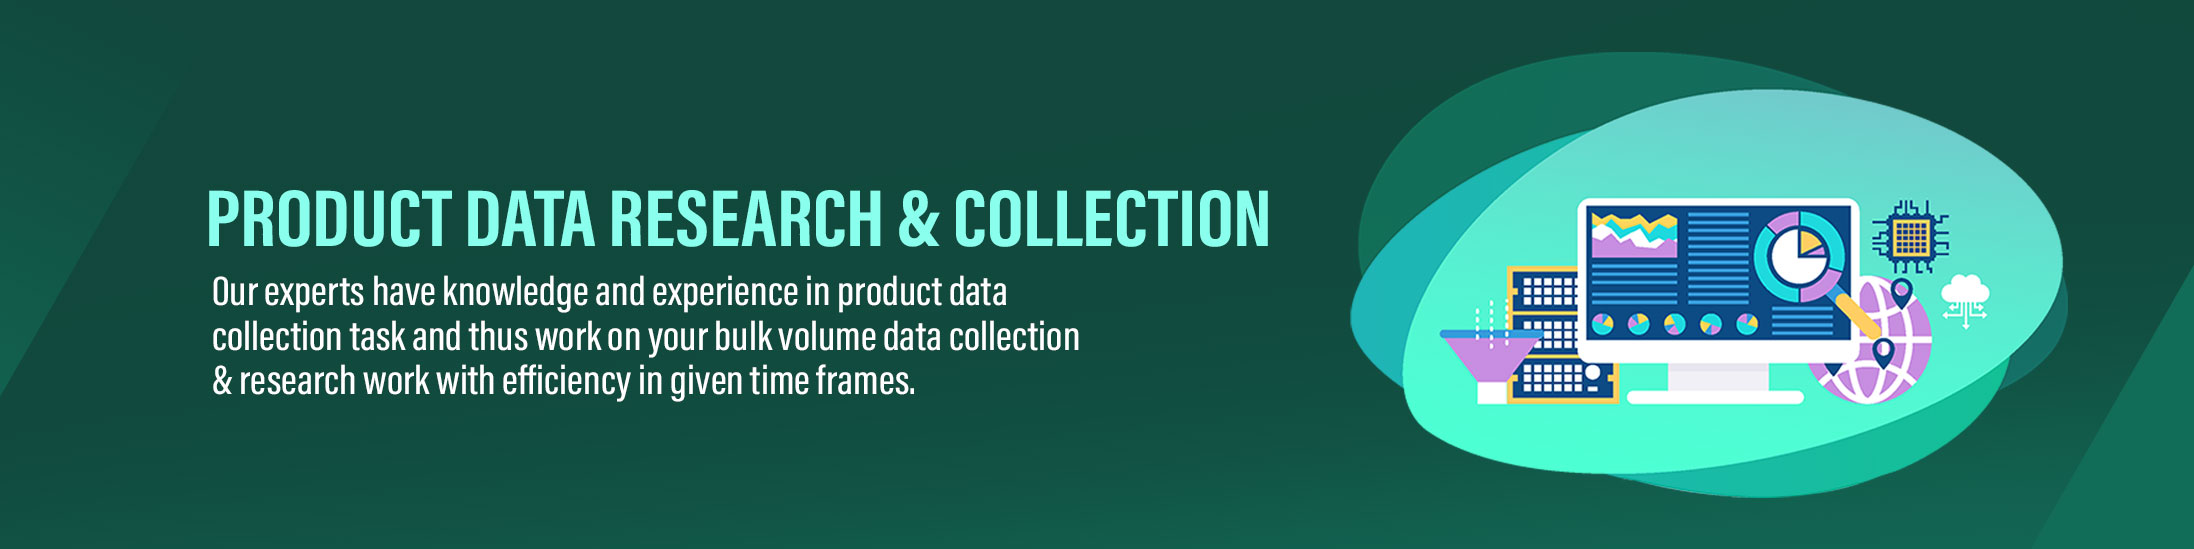 PRODUCT DATA RESEARCH & COLLECTION SERVICES